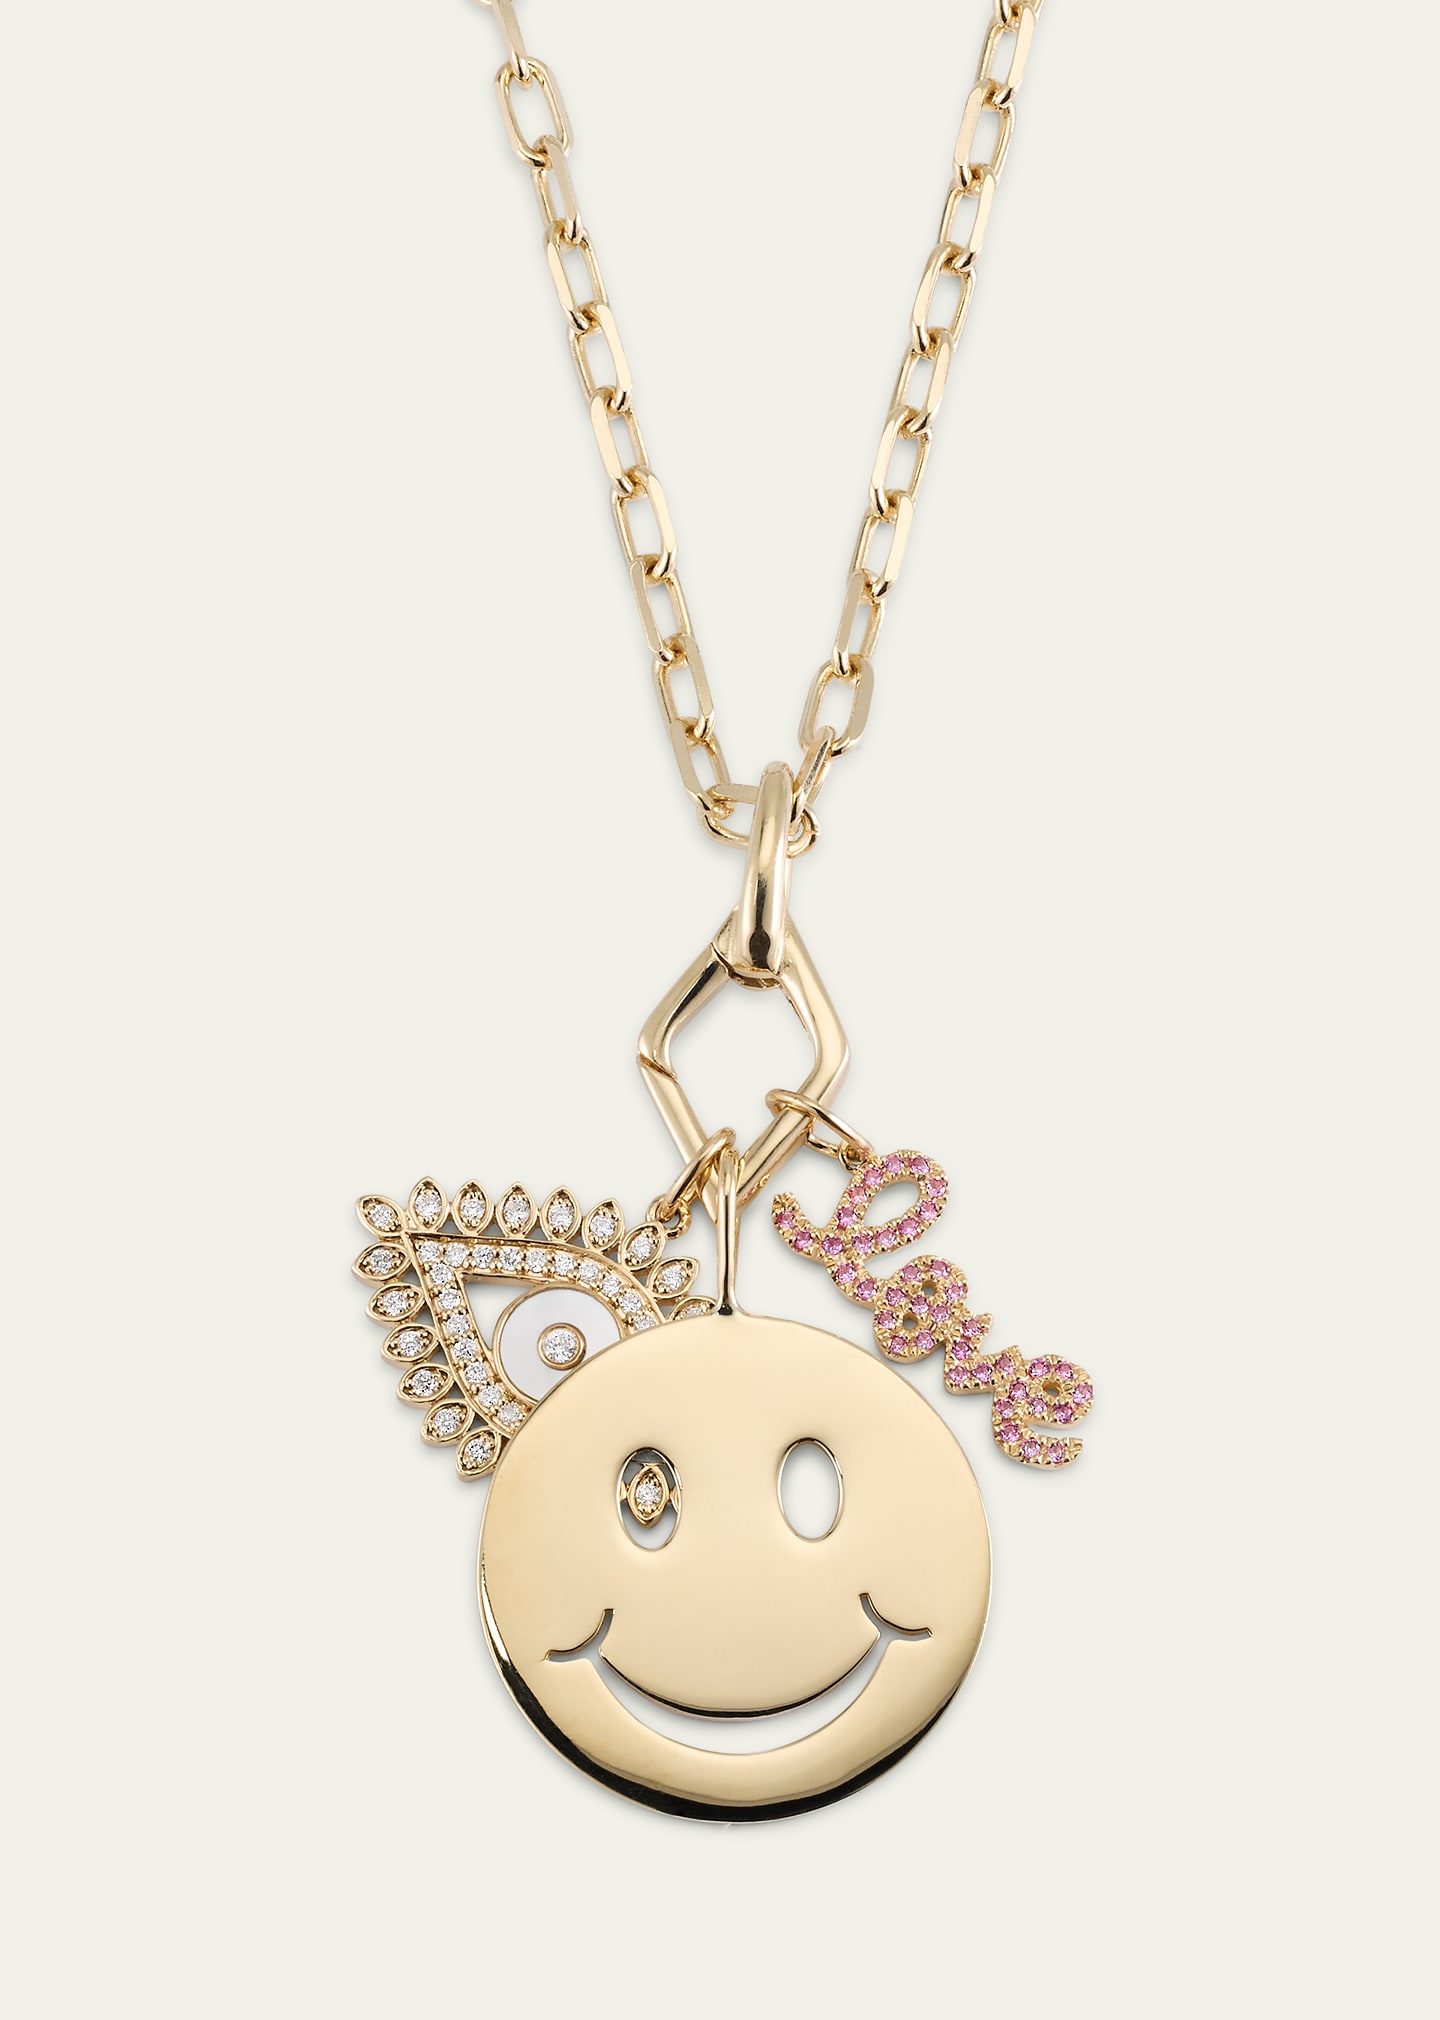 SYDNEY EVAN 14K LOVE, PROTECTION AND HAPPINESS COMBO NECKLACE